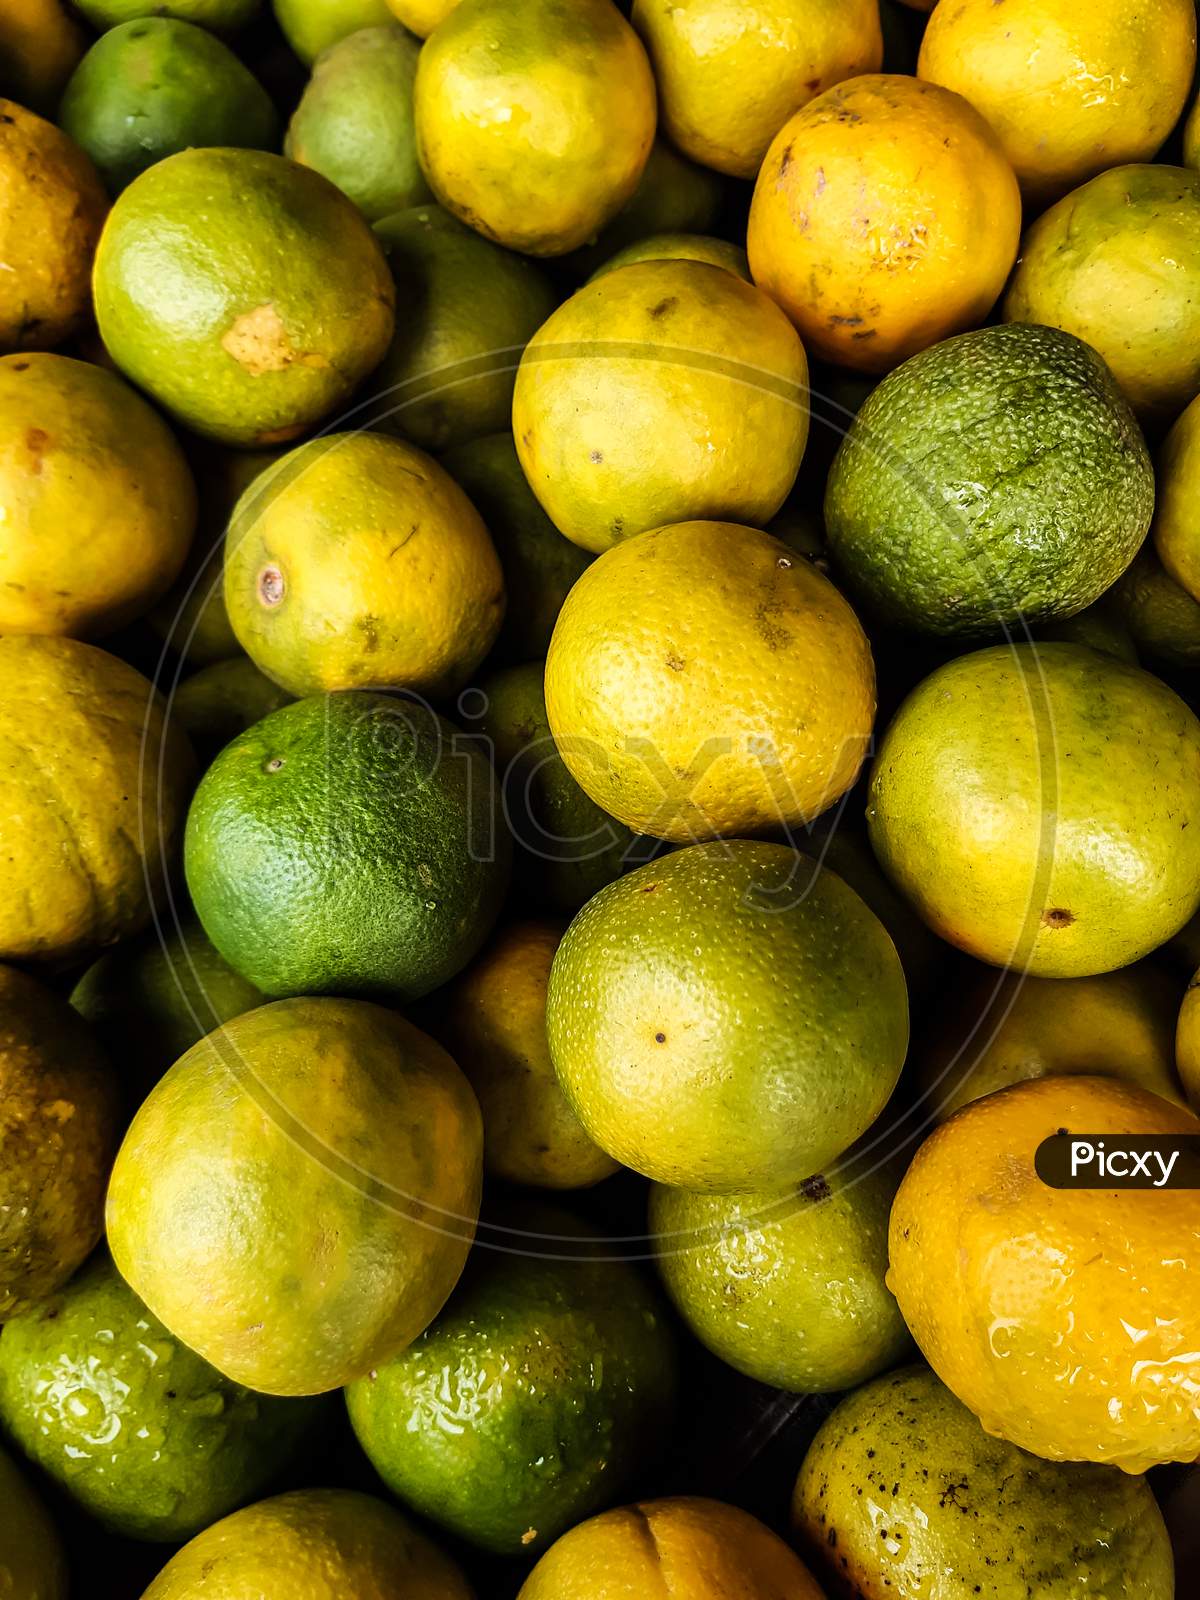 There Are Many Yellow And Green Ripe Seasonal Lemons Together. This Fruit Is Very Beneficial For Health.